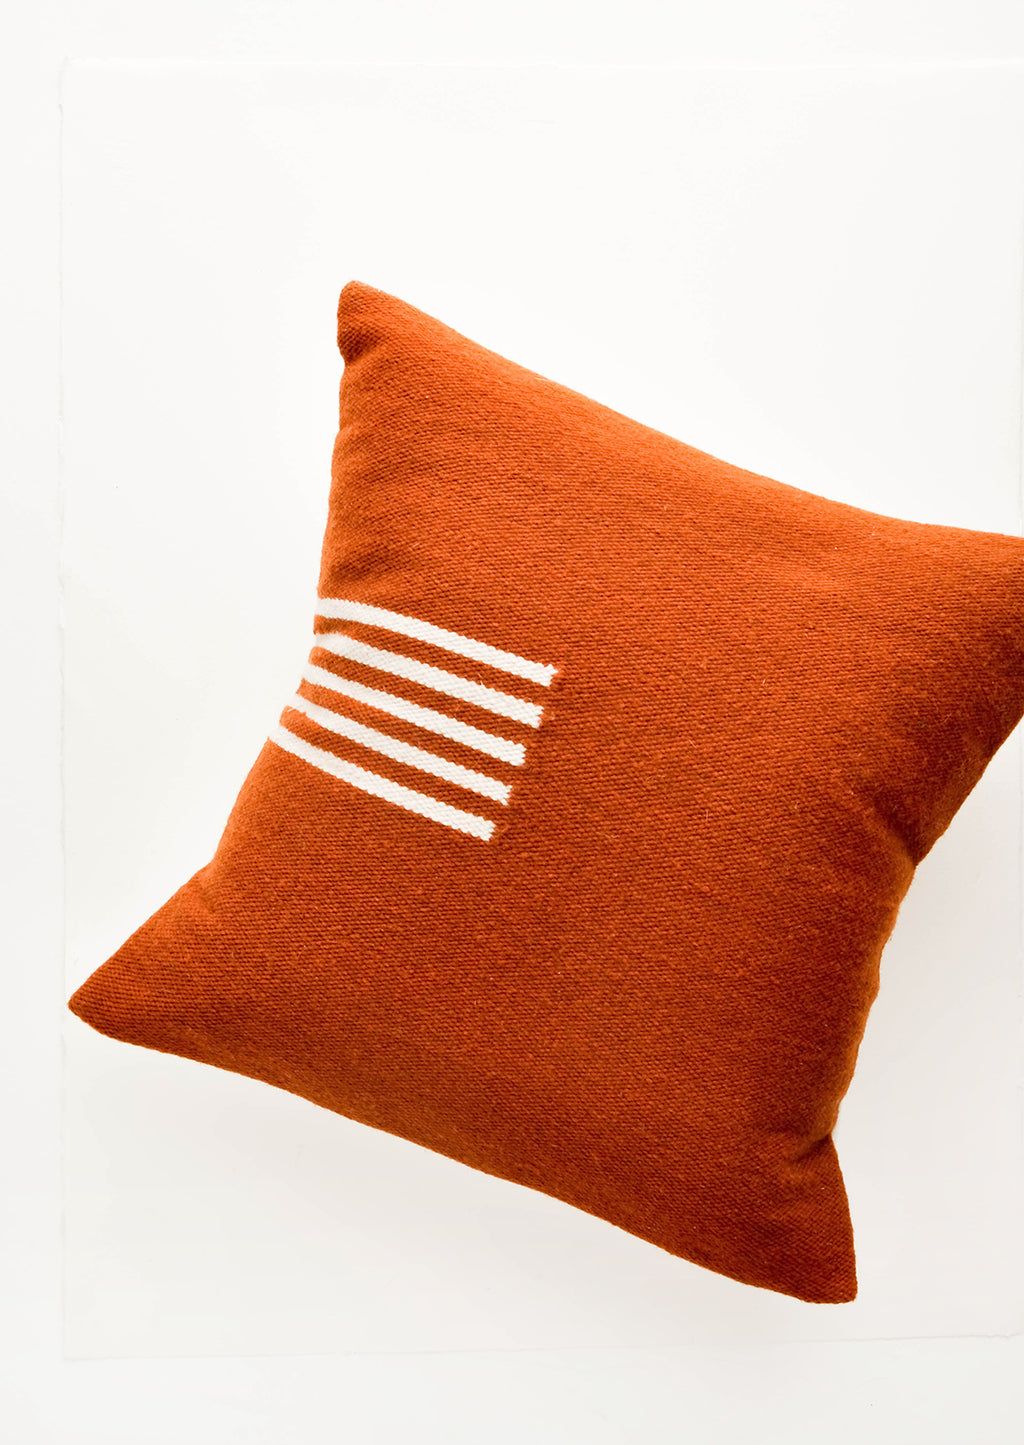 Terracotta / Natural: Terracotta colored, square wool throw pillow with contrasting small stripe detail at side.